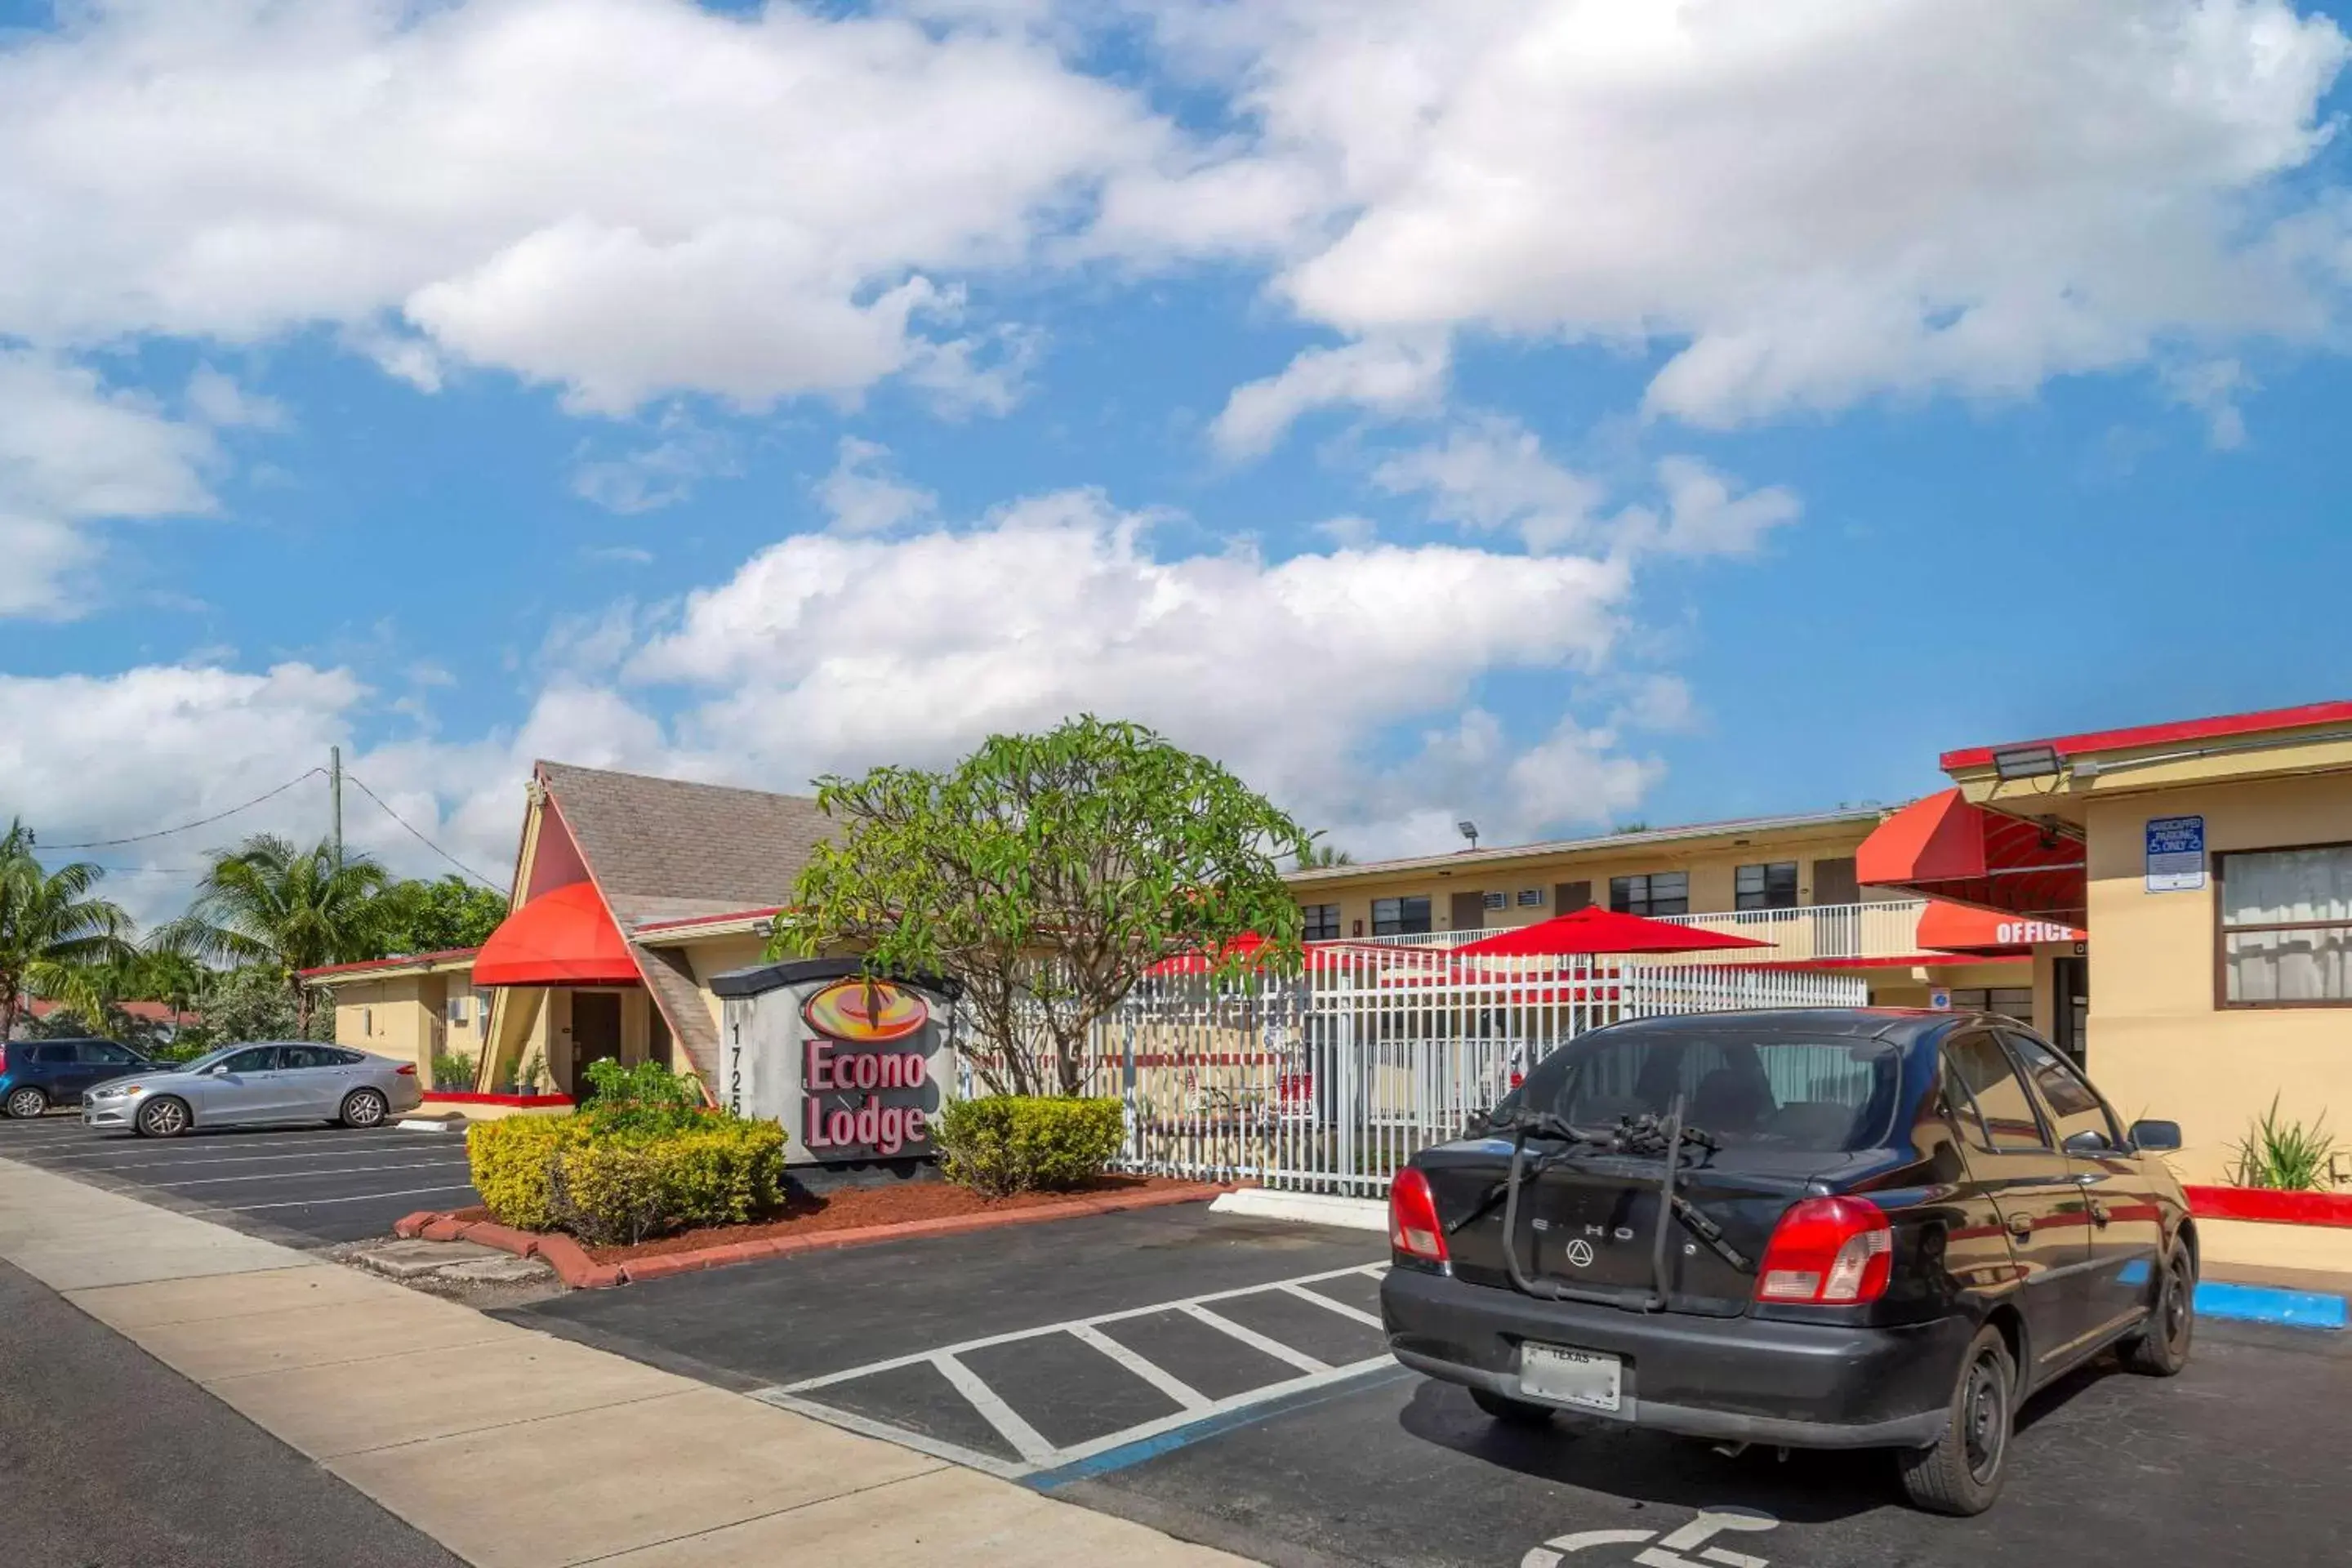 Property Building in Econo Lodge Hollywood-Ft Lauderdale International Airport